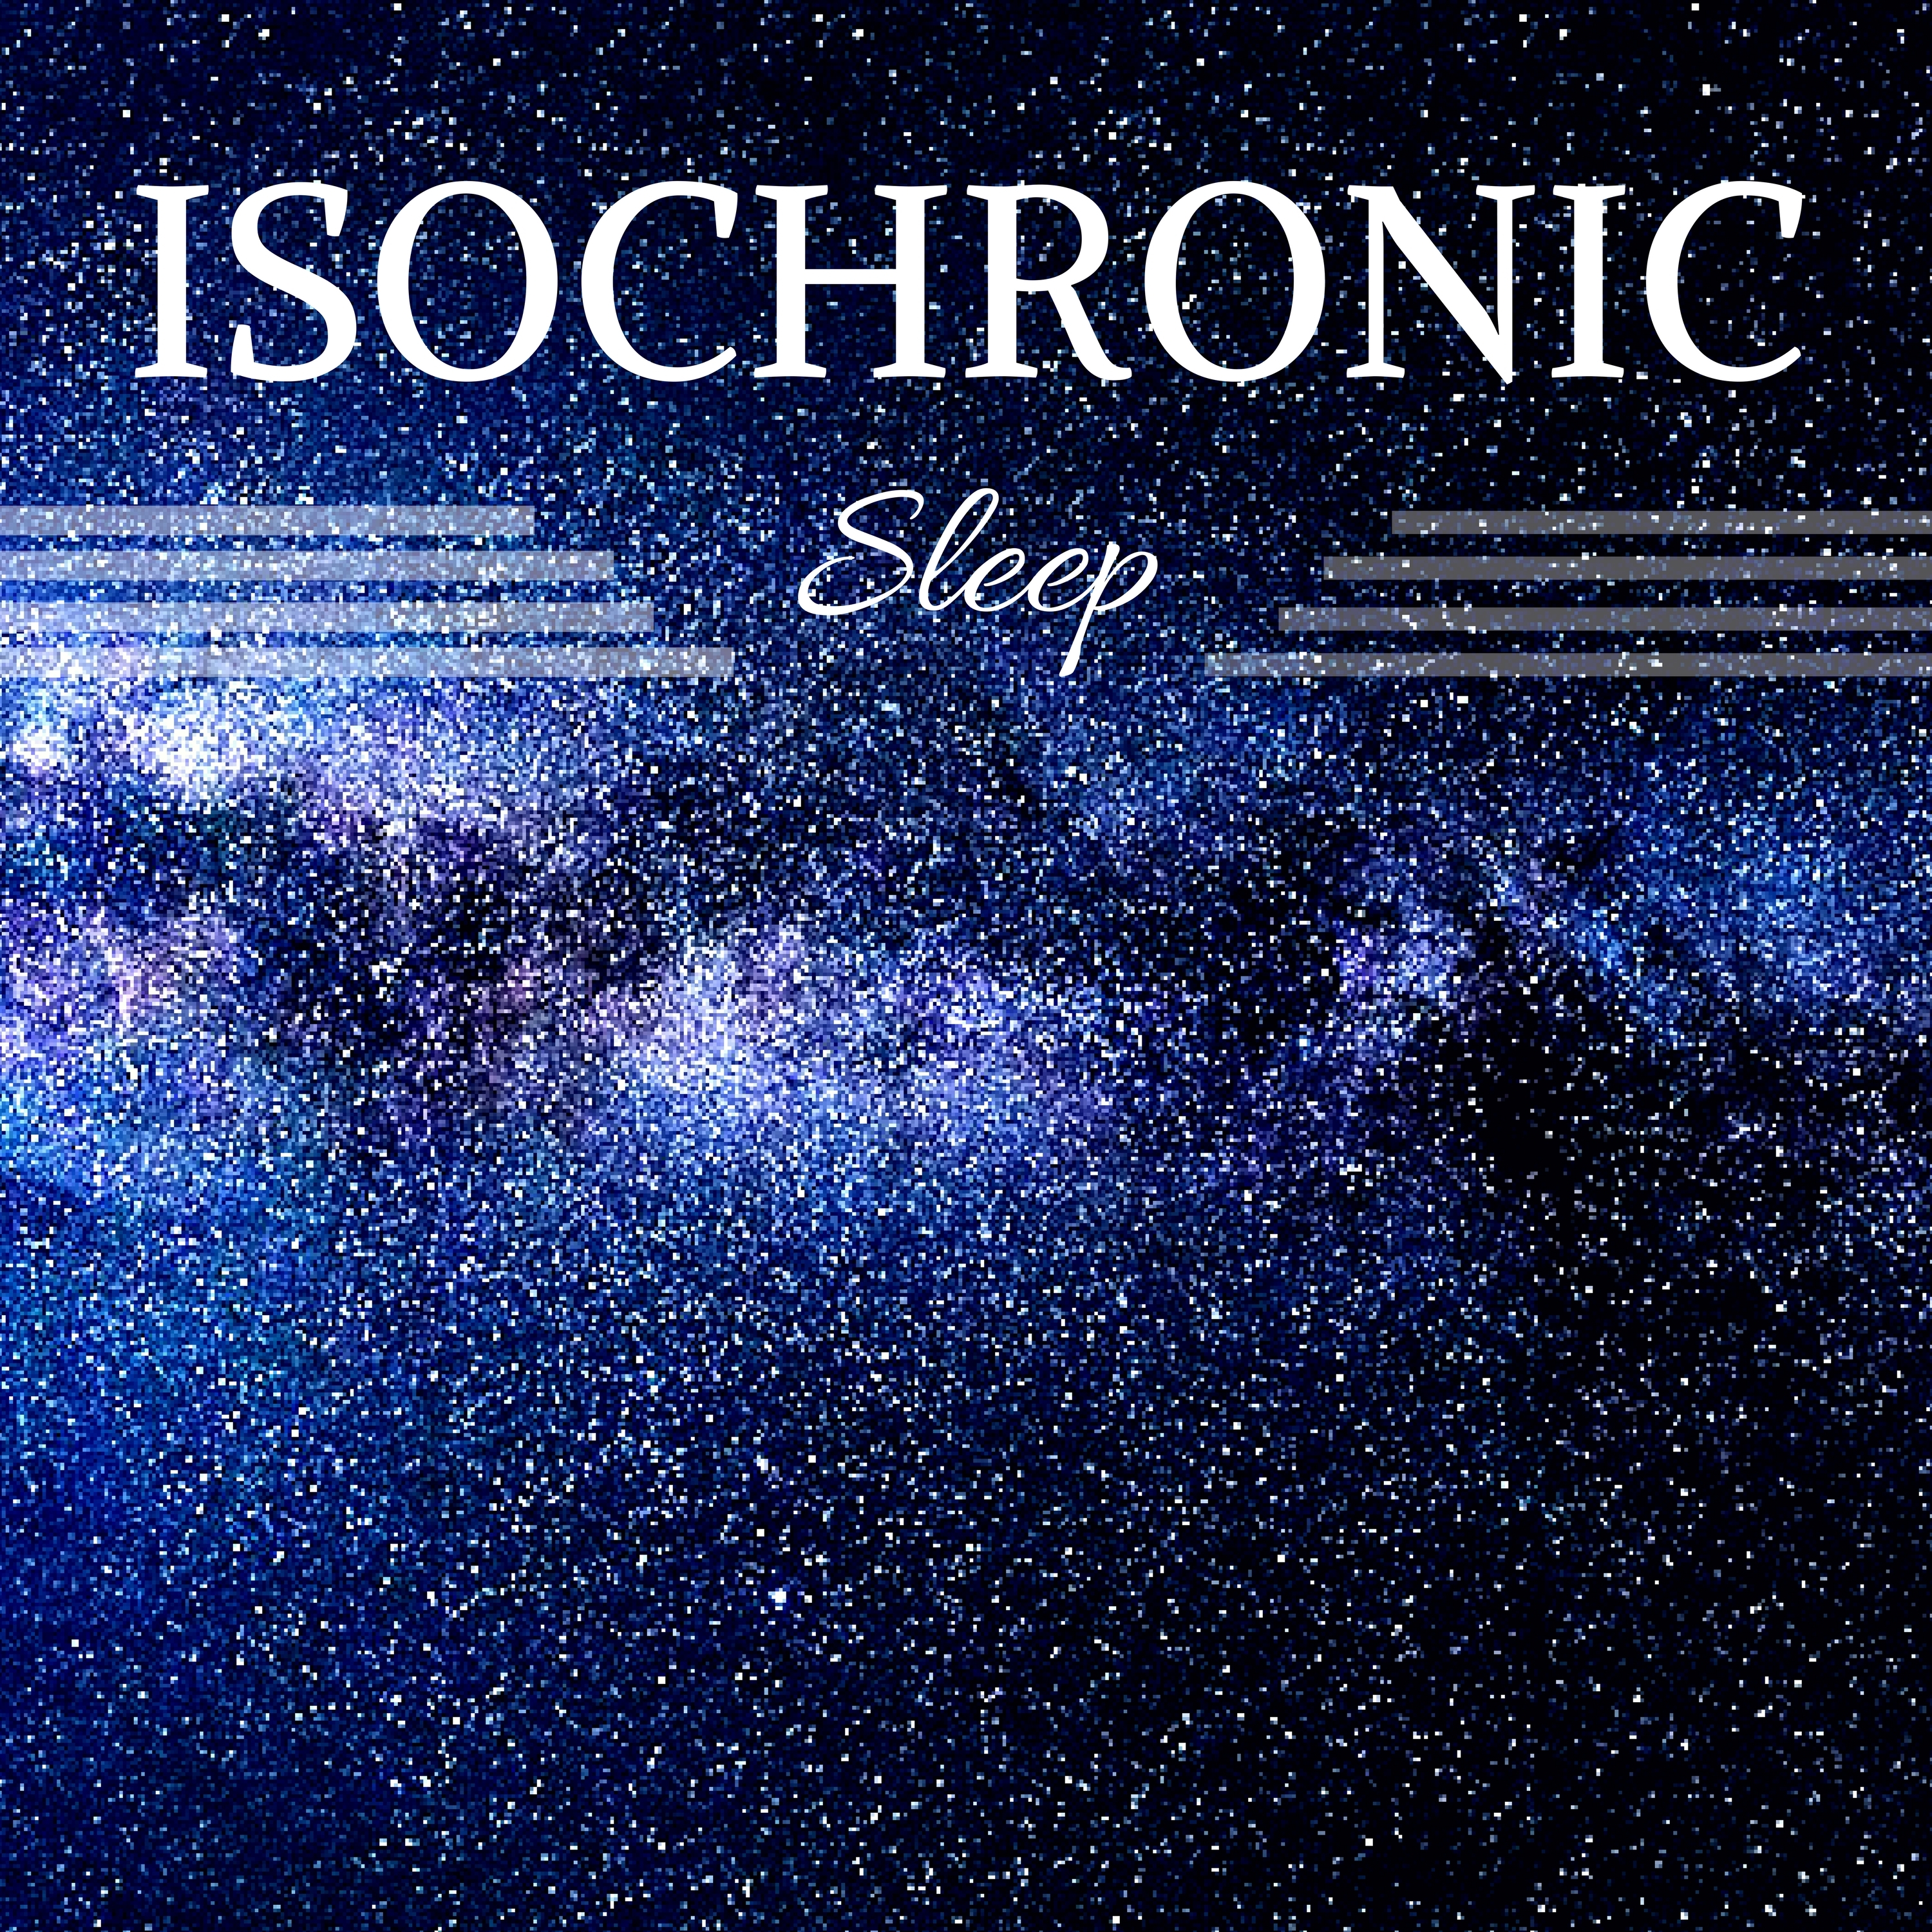 Isochronic Sleep - Lucid Dreaming Relaxing Songs, Sound of Nature for Brainwave Entrainment